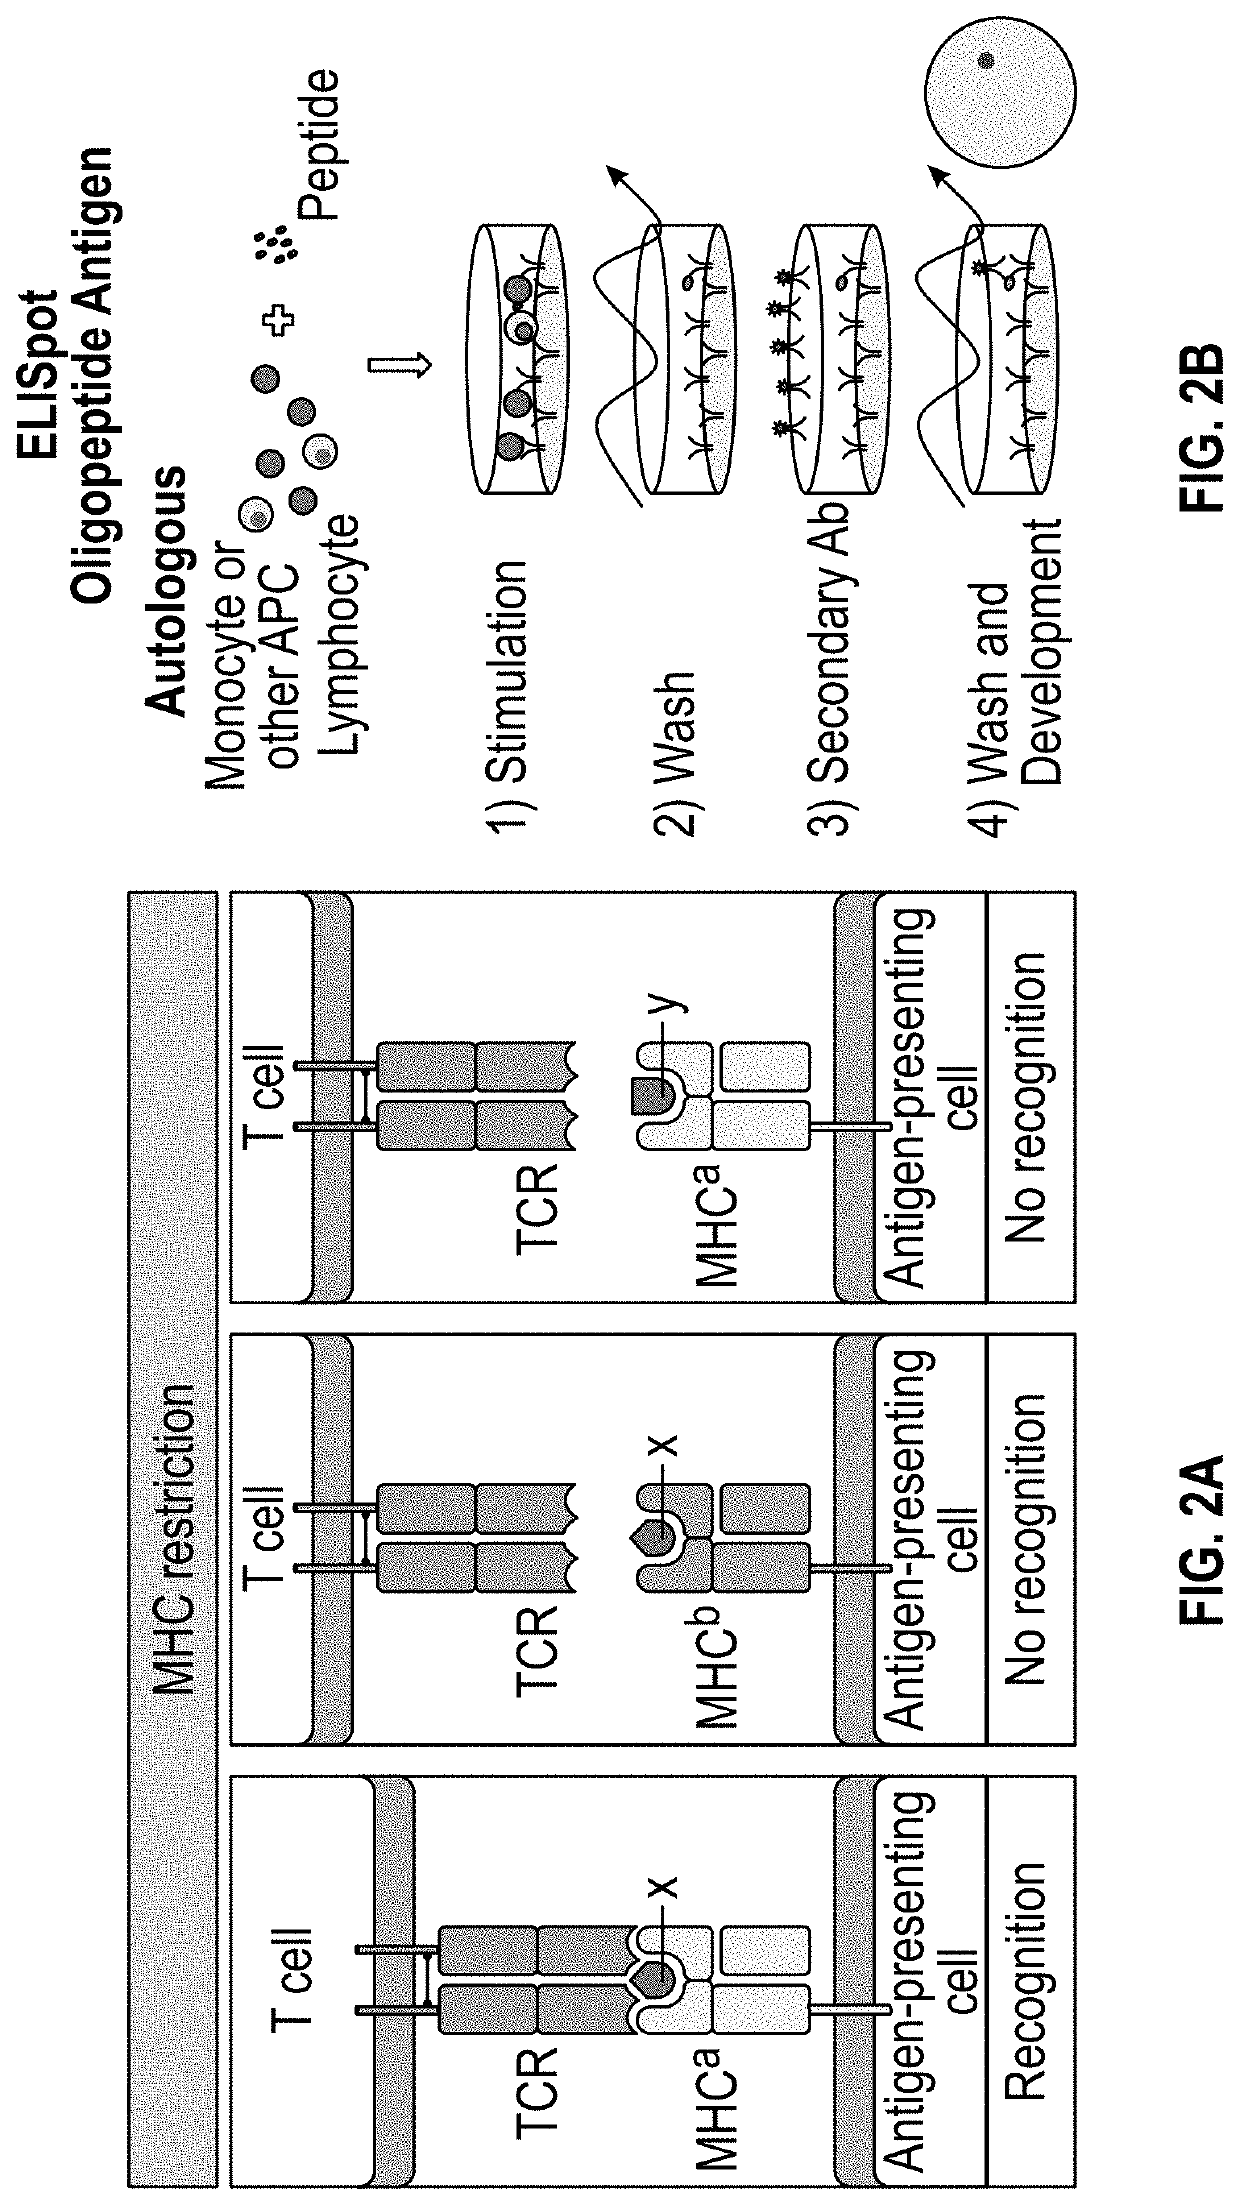 Methods and delivery of allogeneic cell products